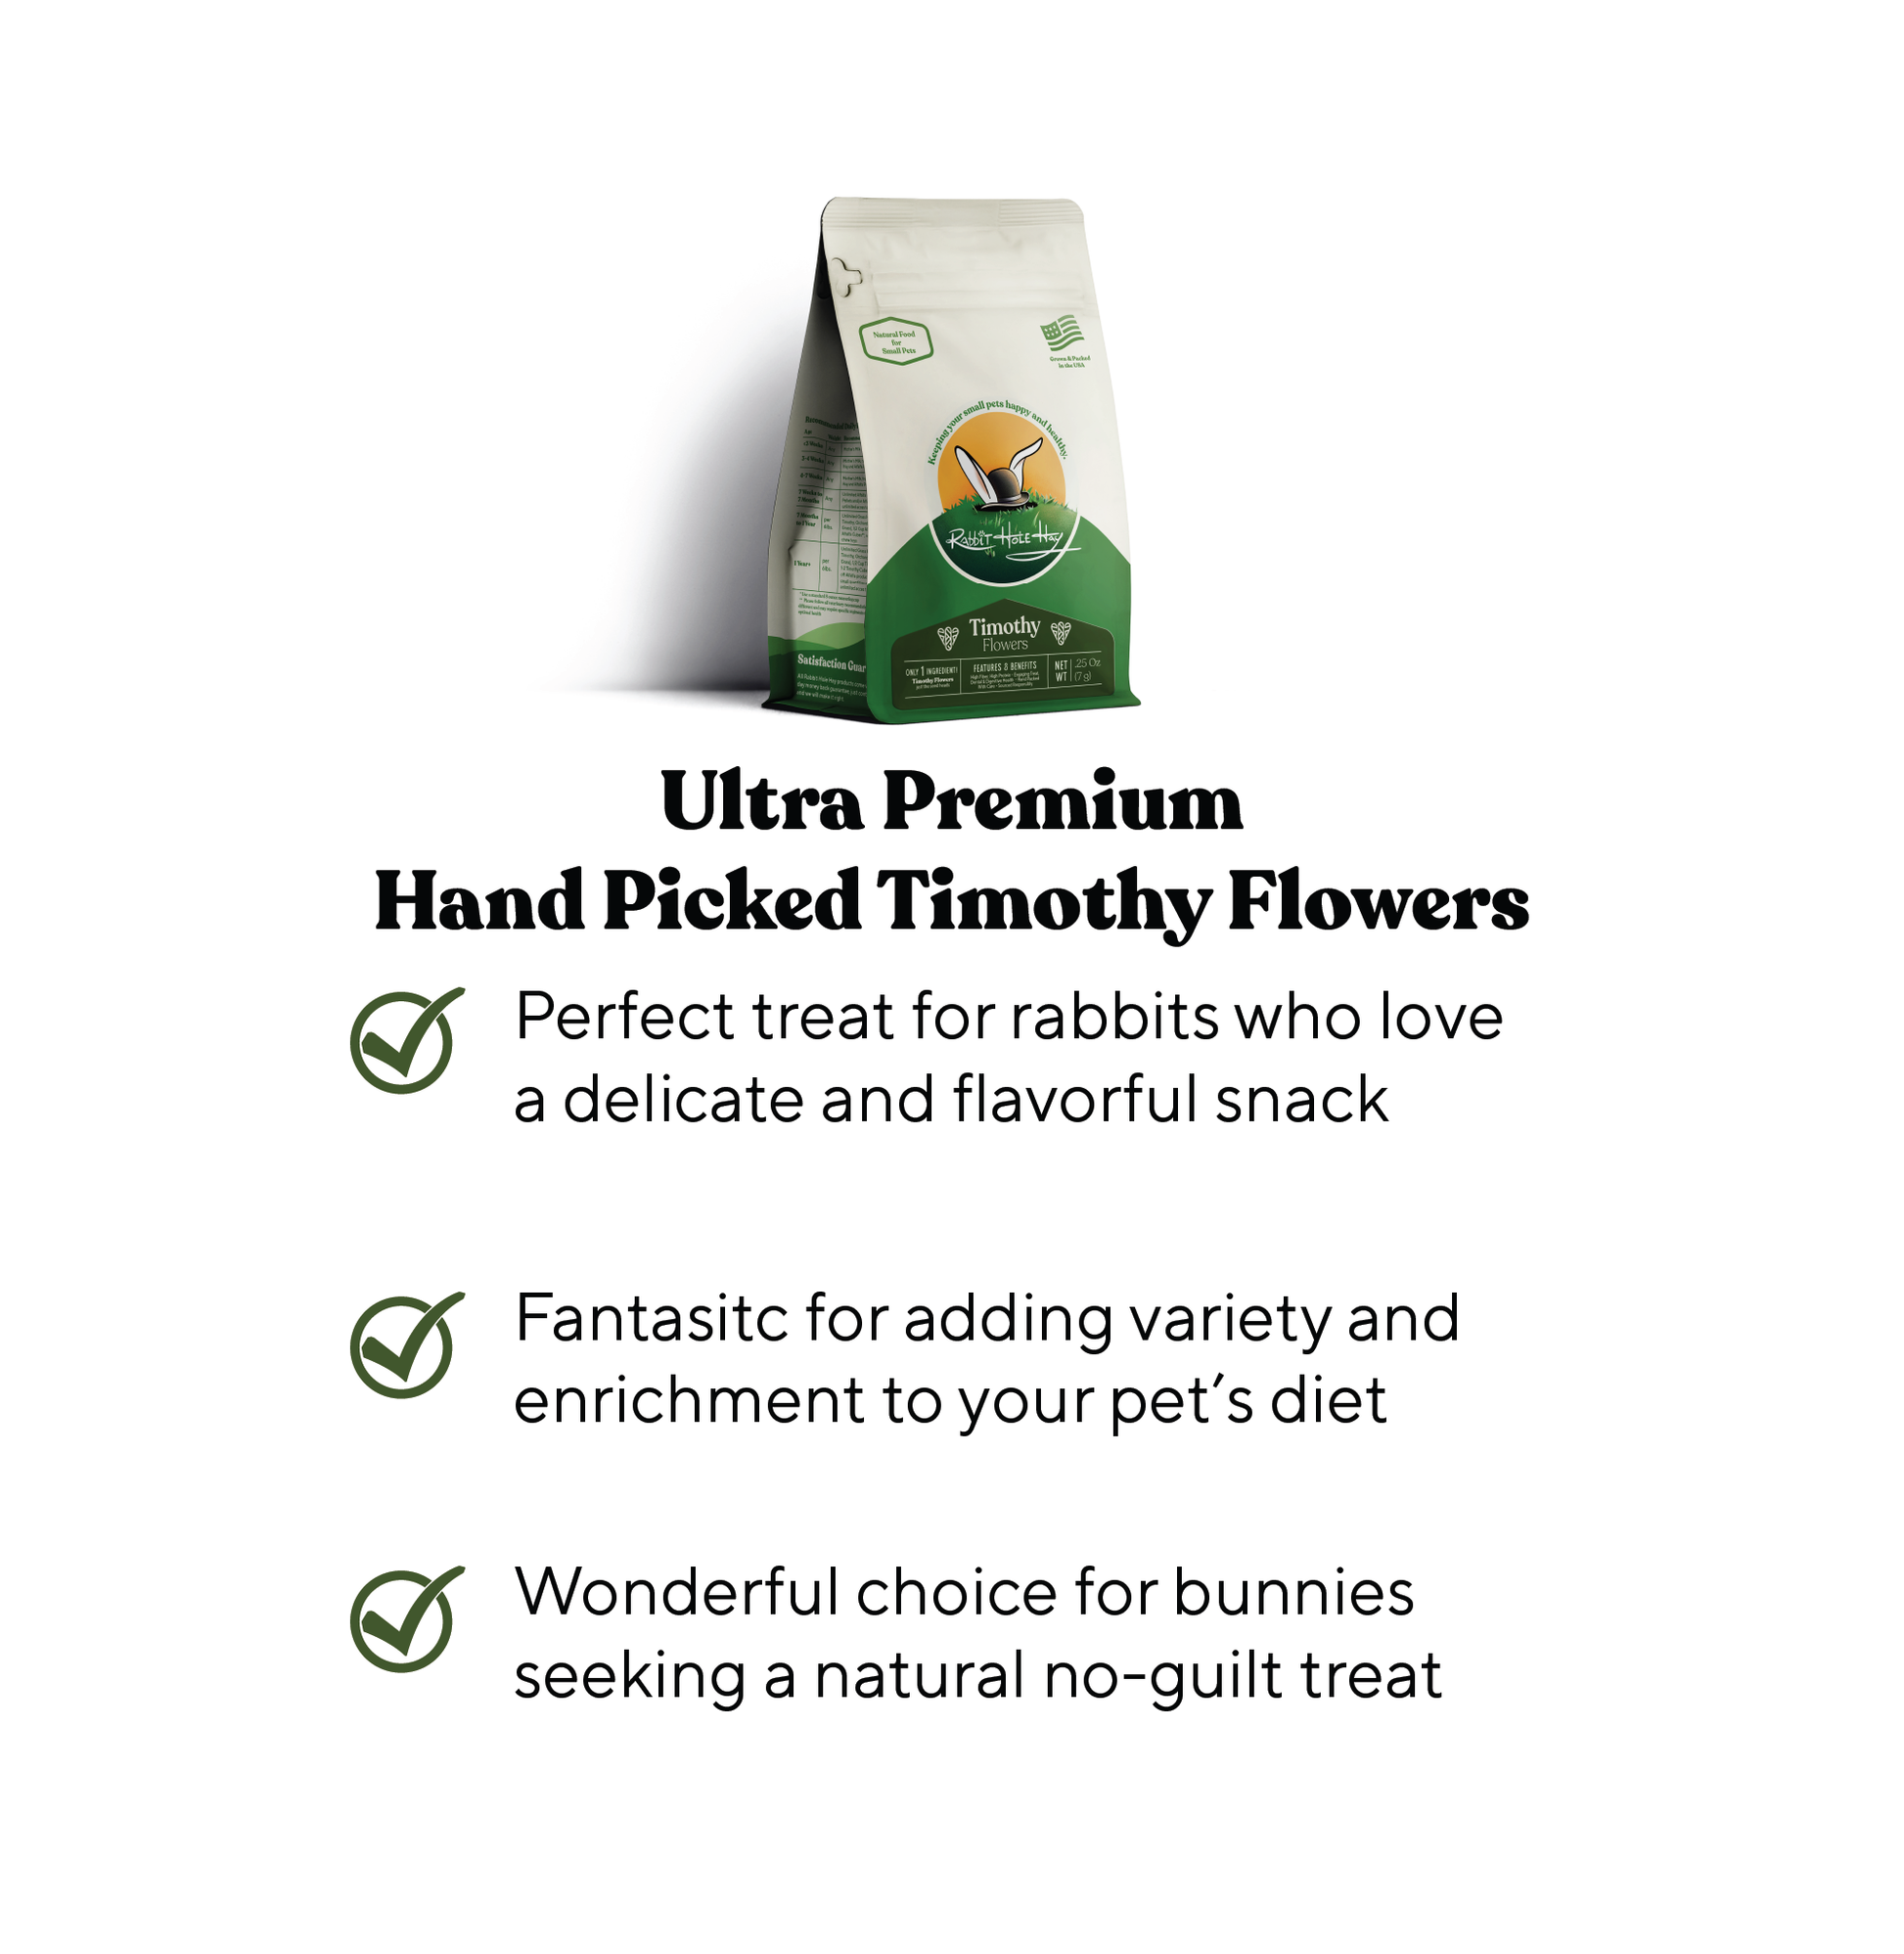 Hand Picked Timothy Hay Flowers - Benefits